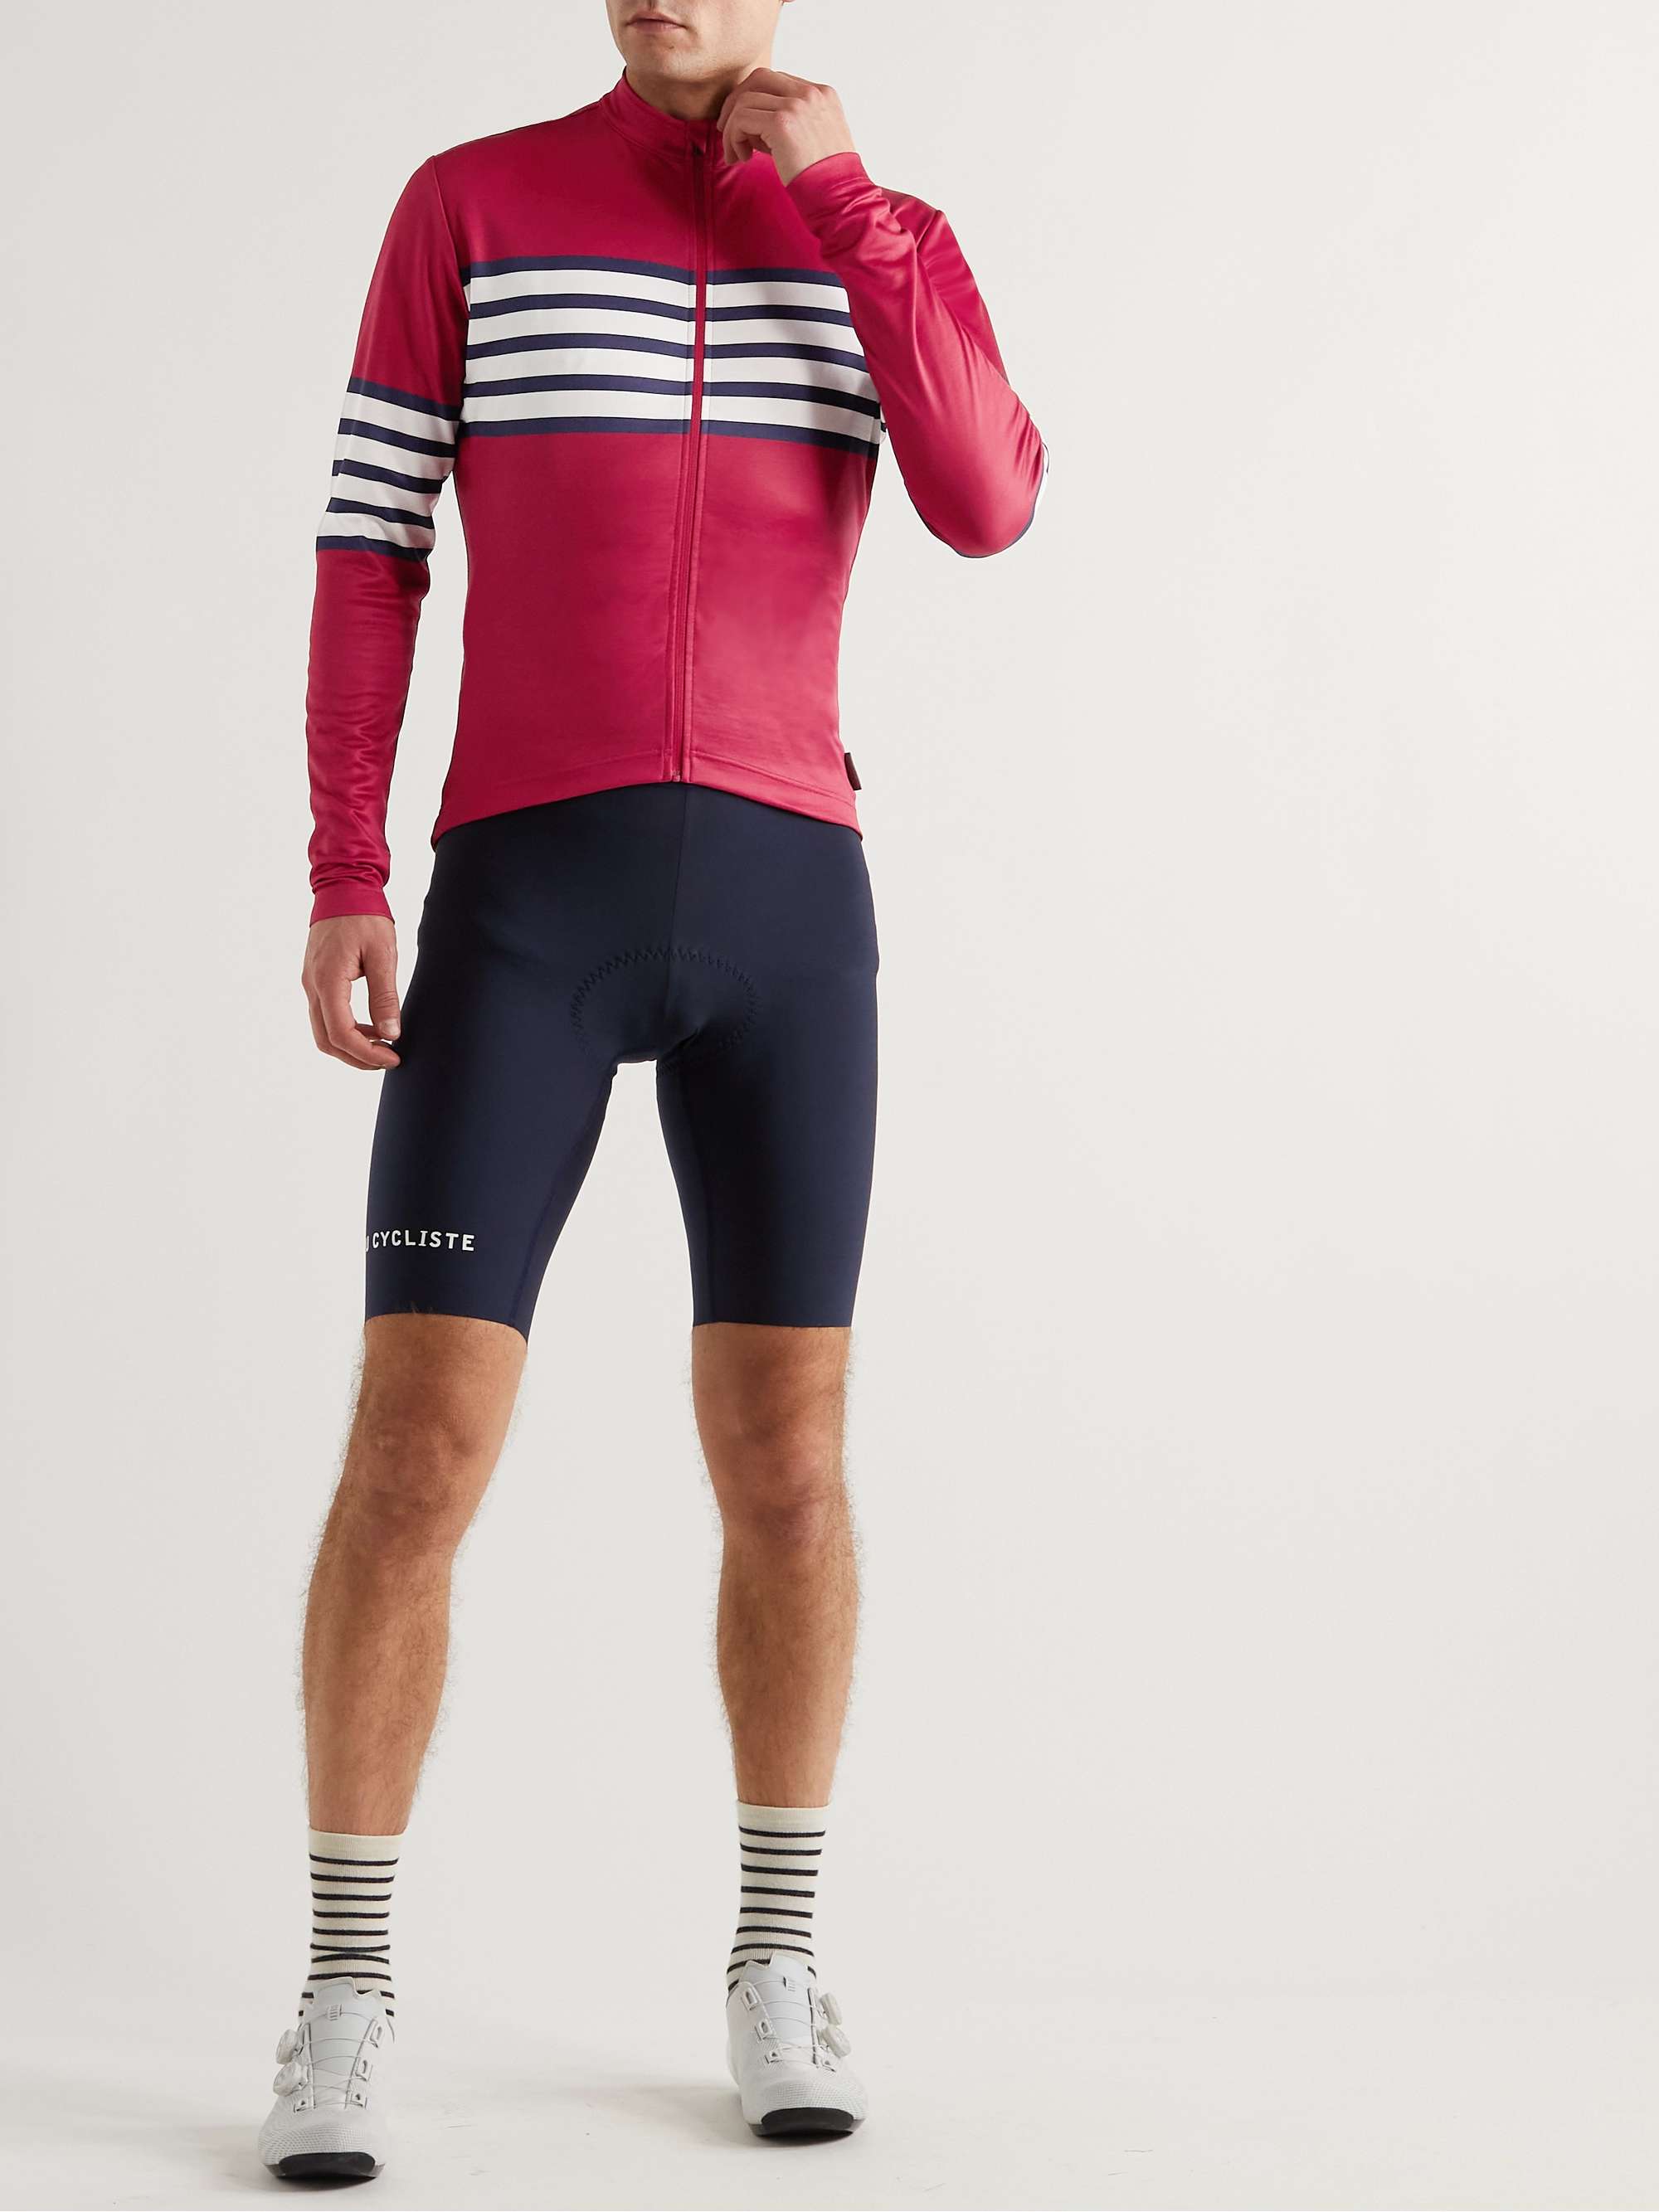 CAFE DU CYCLISTE Claudette Striped Recycled Cycling Jersey